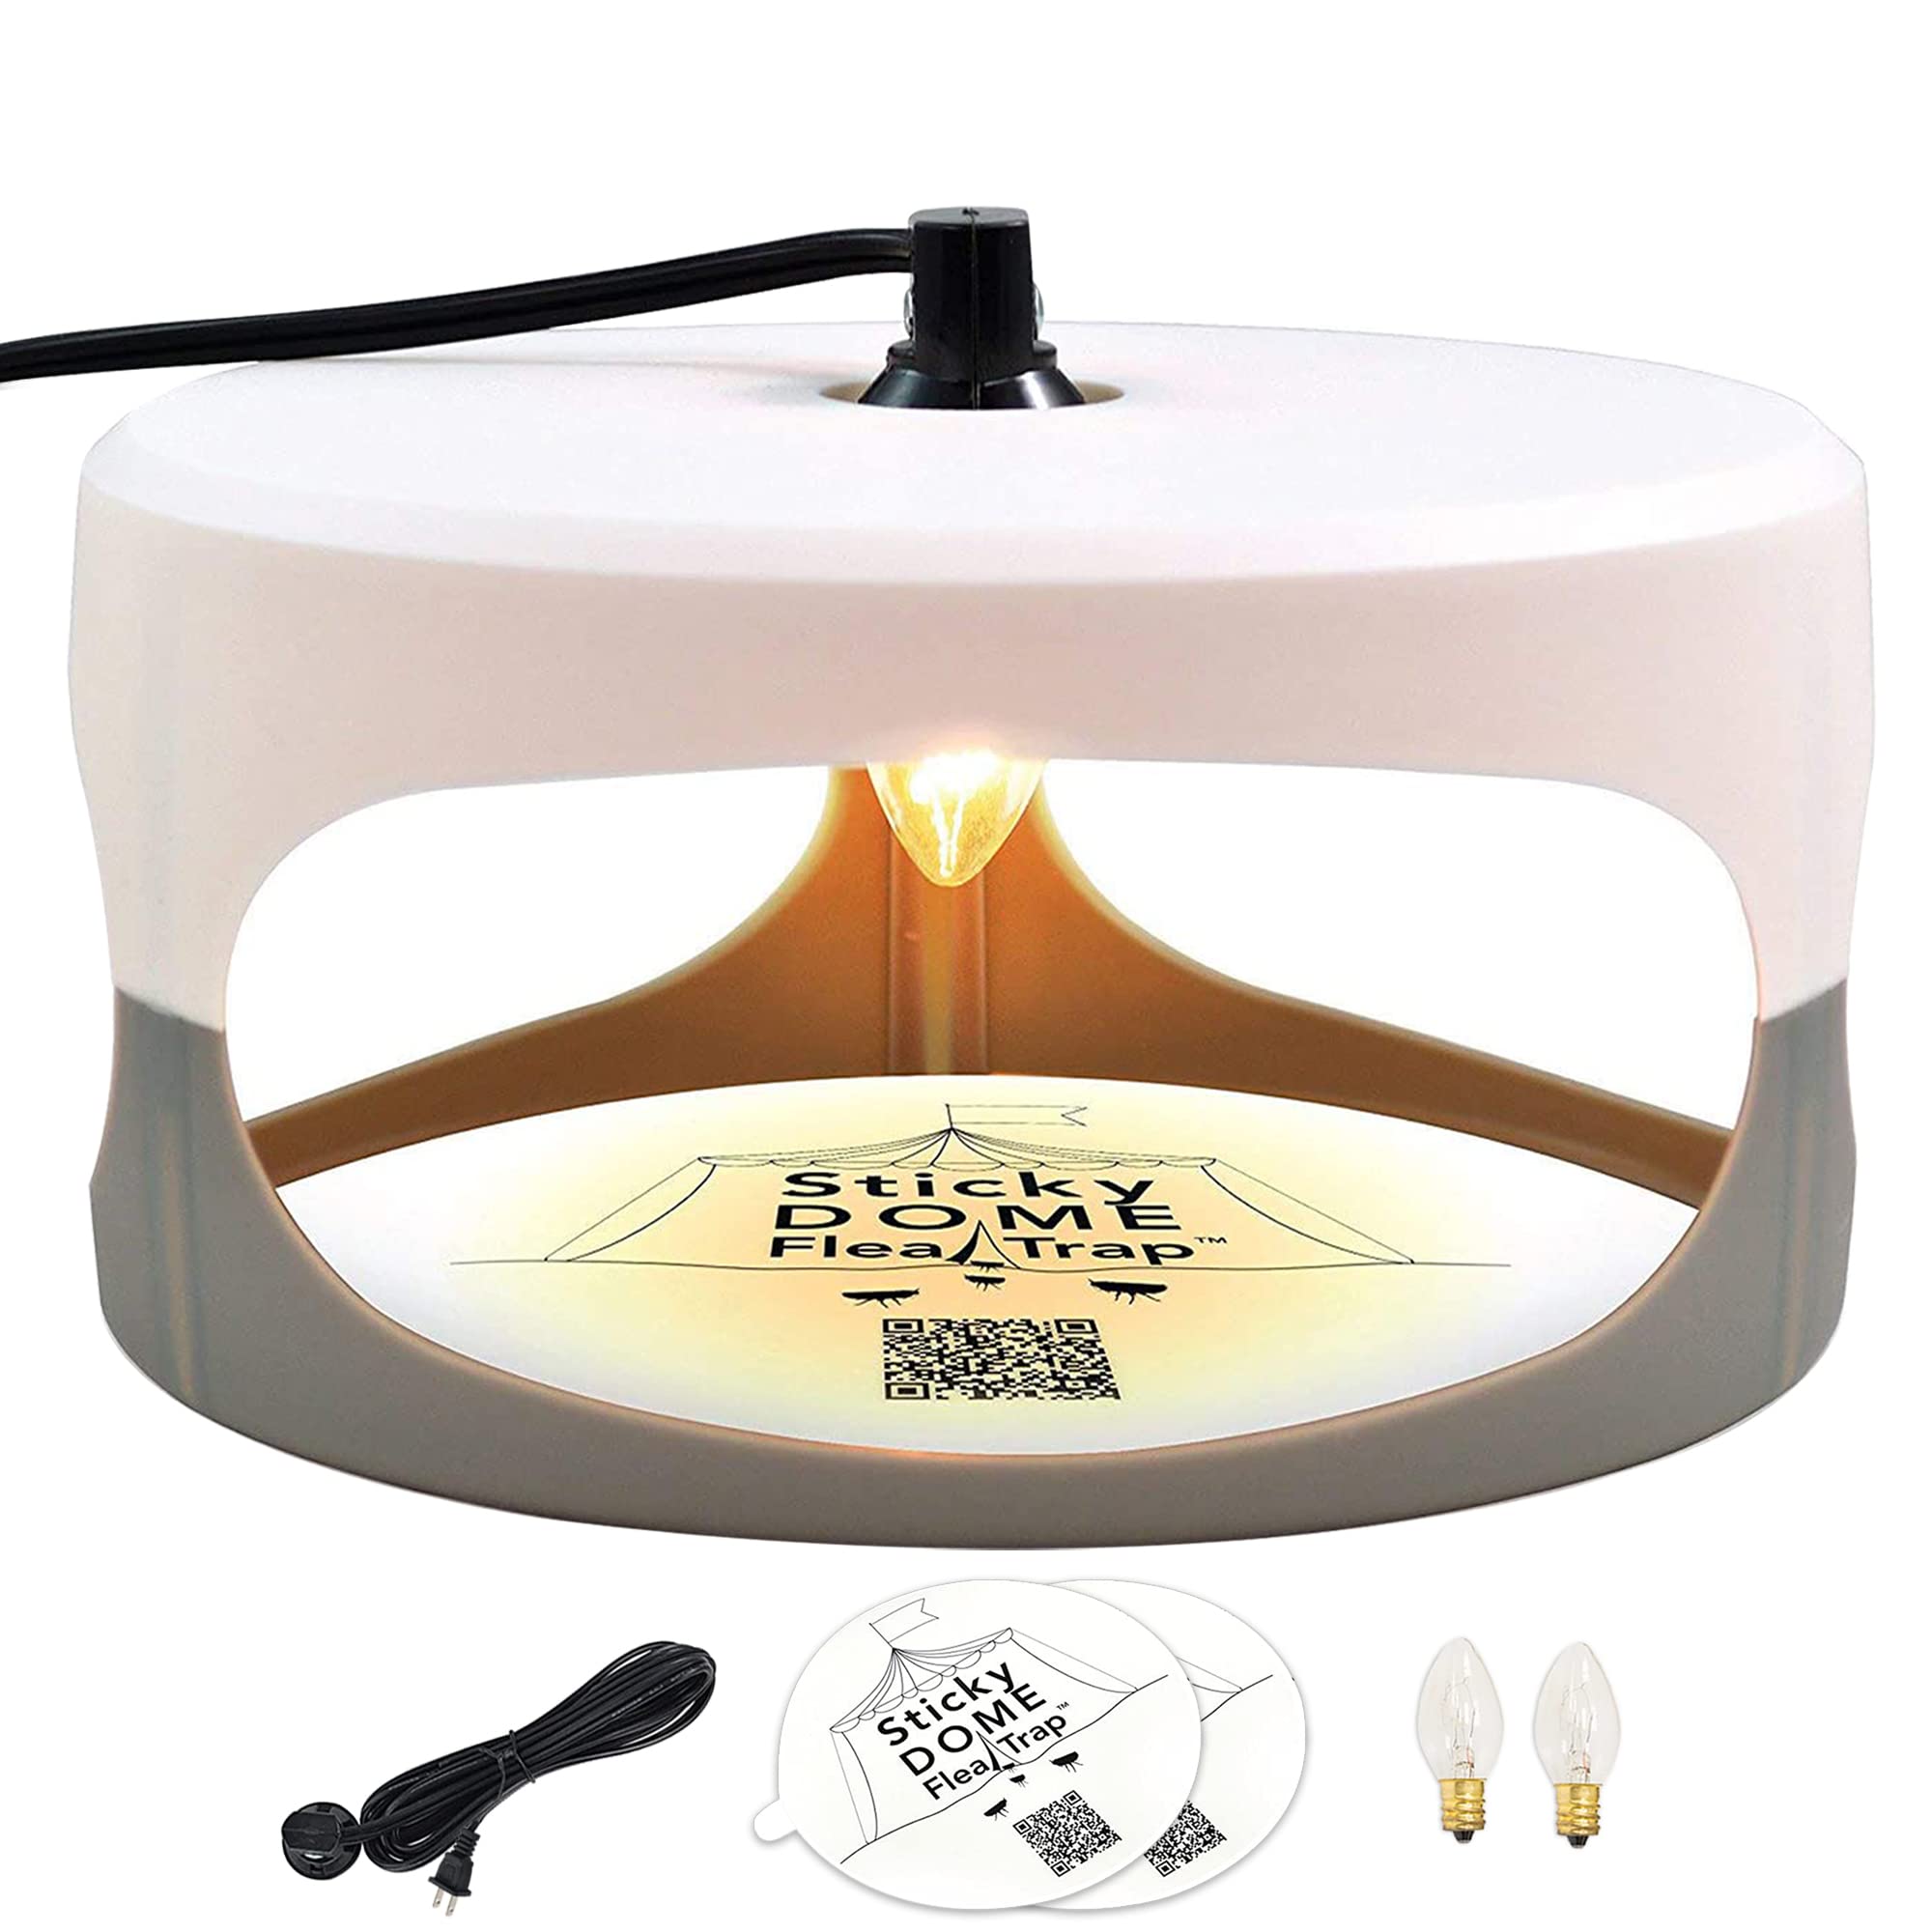 ASPECTEK Flea & Bed Bug Trap with 2 Adhesive Discs Included Odourless, Non-Toxic. Safe for Children and Pets (flea Trap)